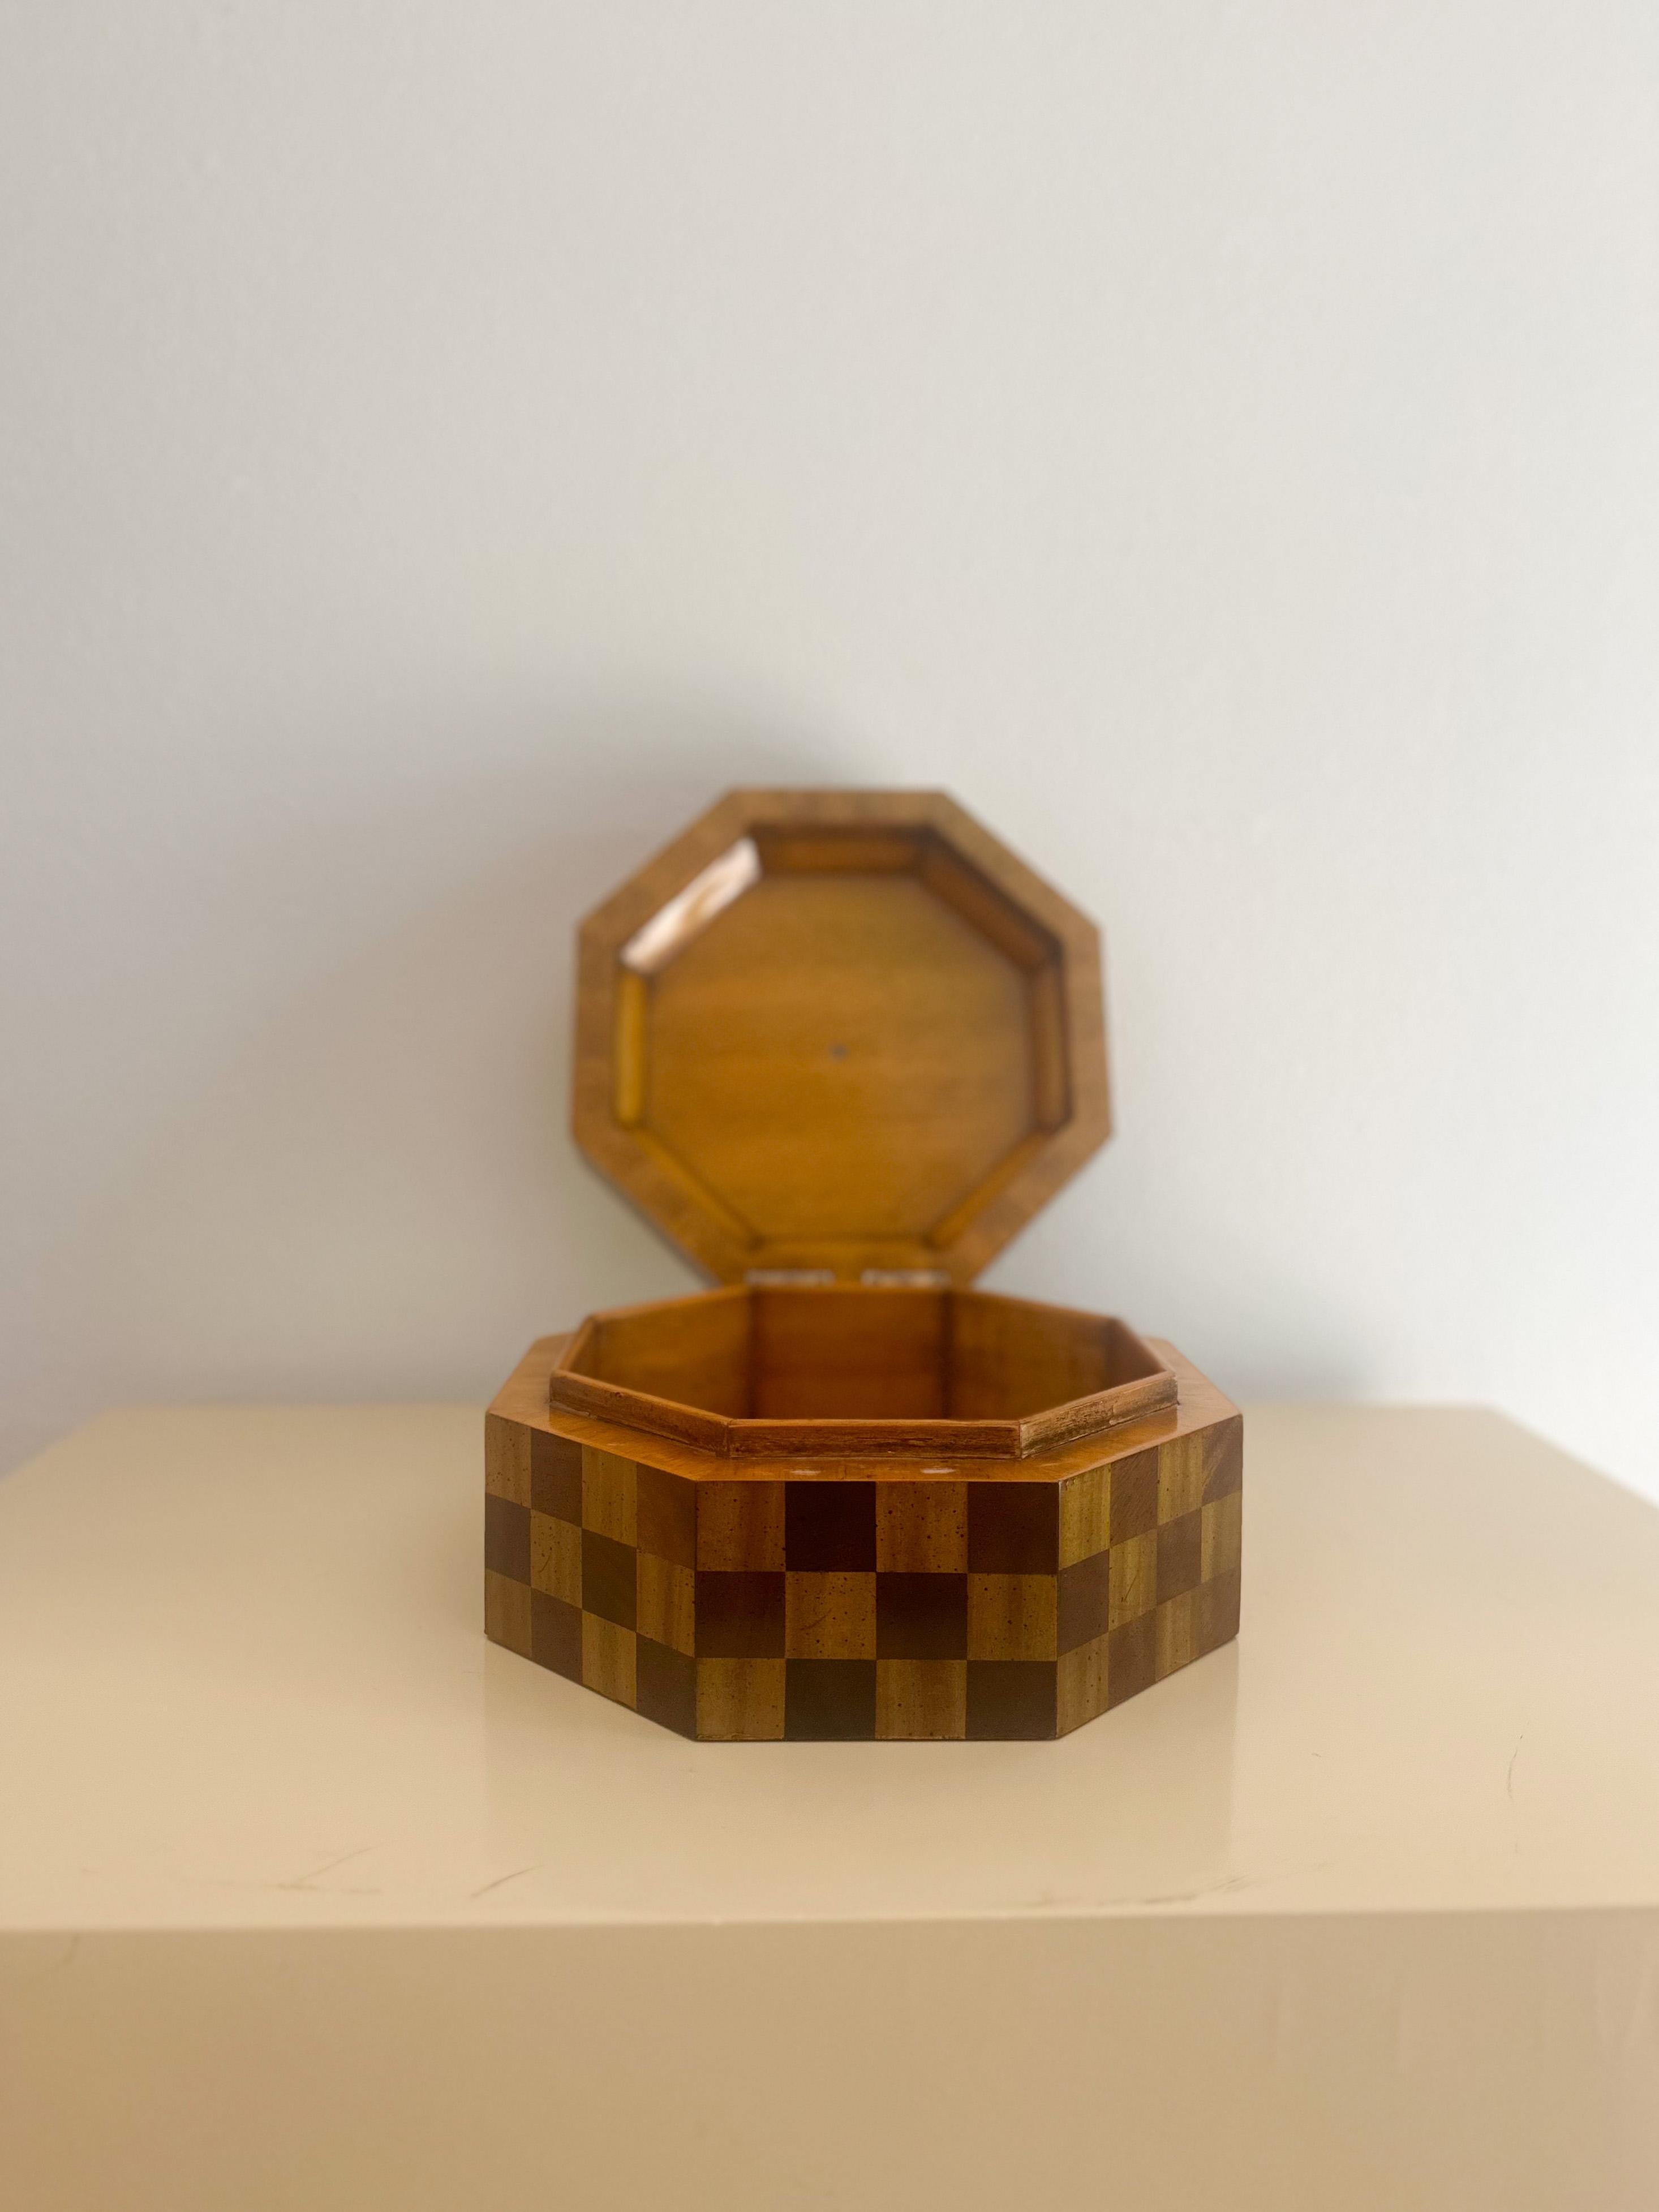 Beautiful octagonal mahogany box with checkered parquetry, hinged top, silver finial, and fully-finished wood interior lining, hand-made in the Philippines by Maitland Smith, c.1980s. This handcrafted piece is a work of art, showing utmost attention